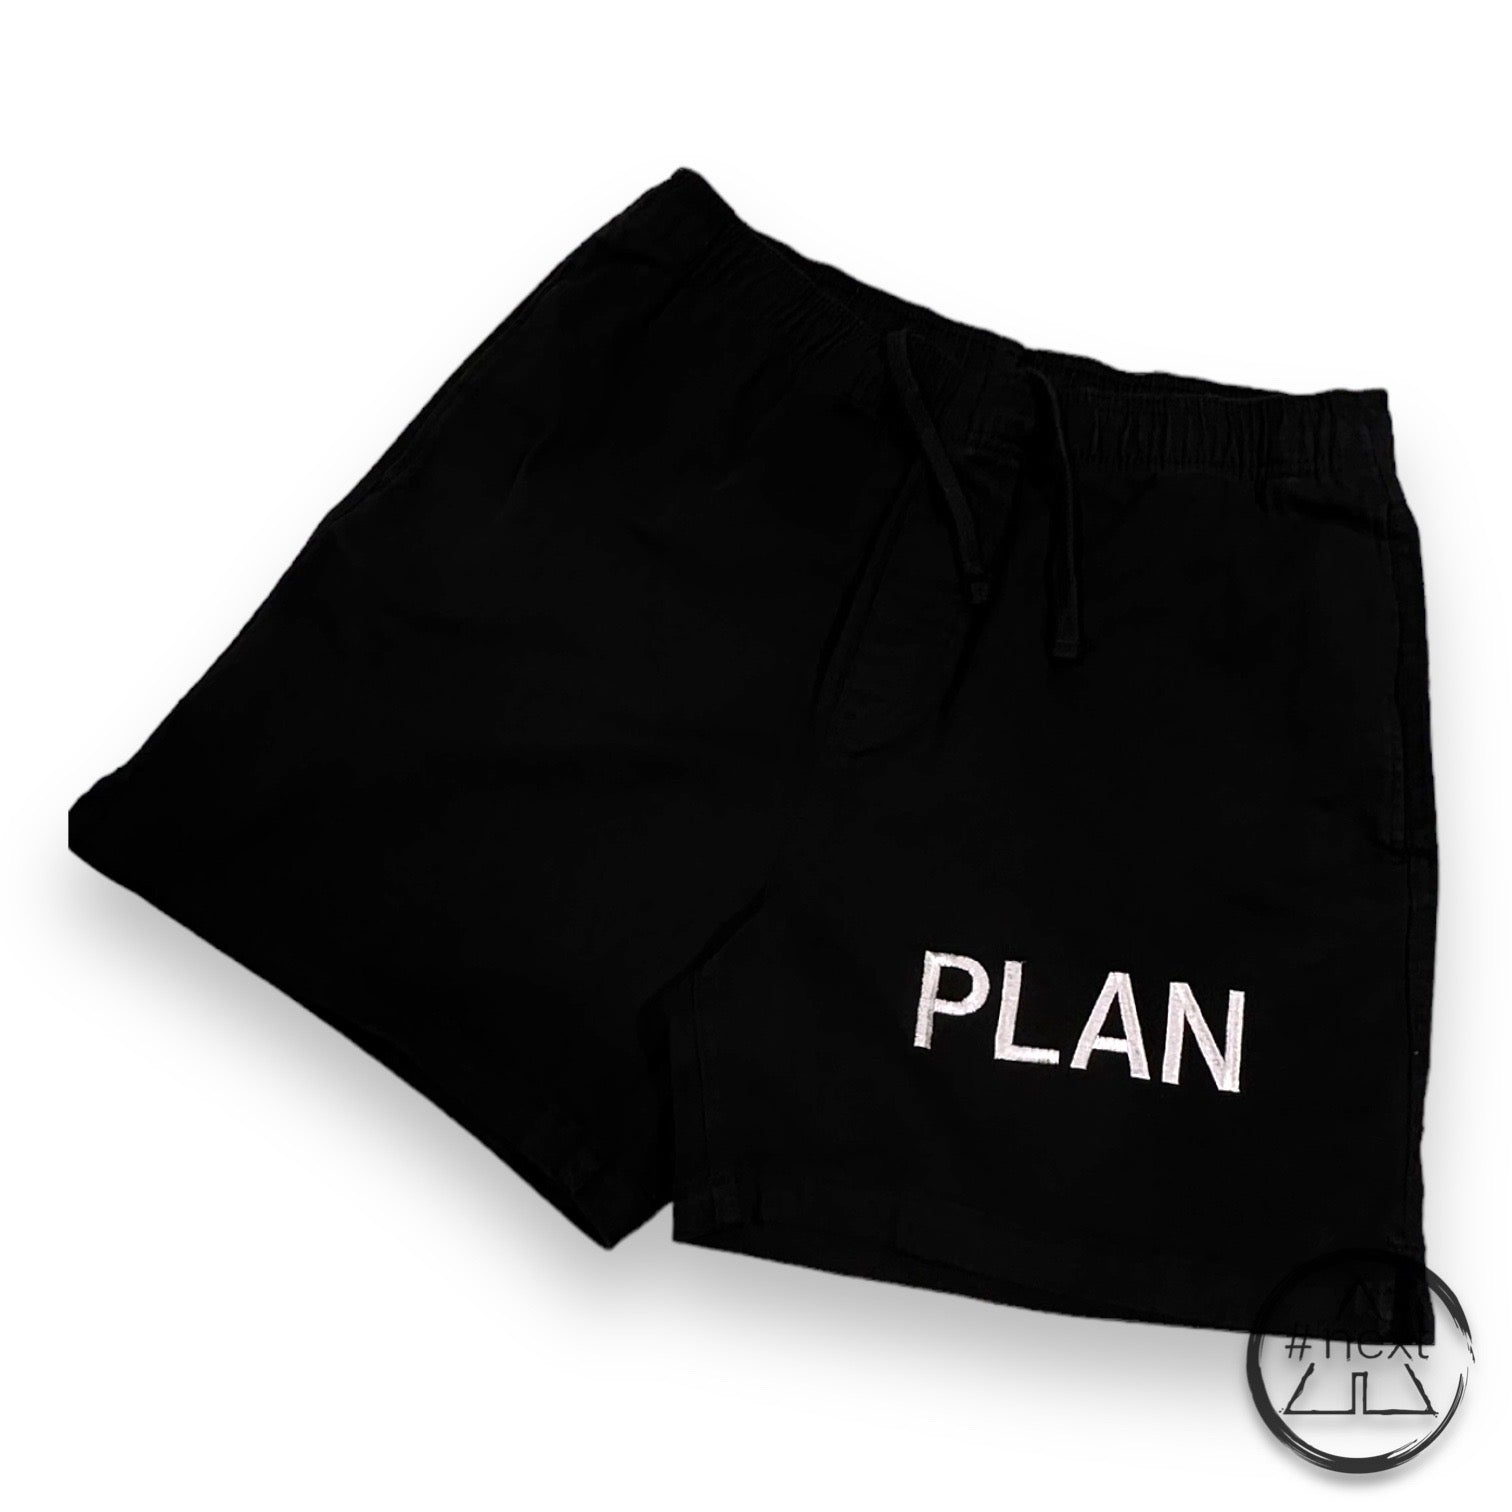 nngr2 - SHORTS in cotone 100% - I HAVE A PLAN (PLAN)  - nero.